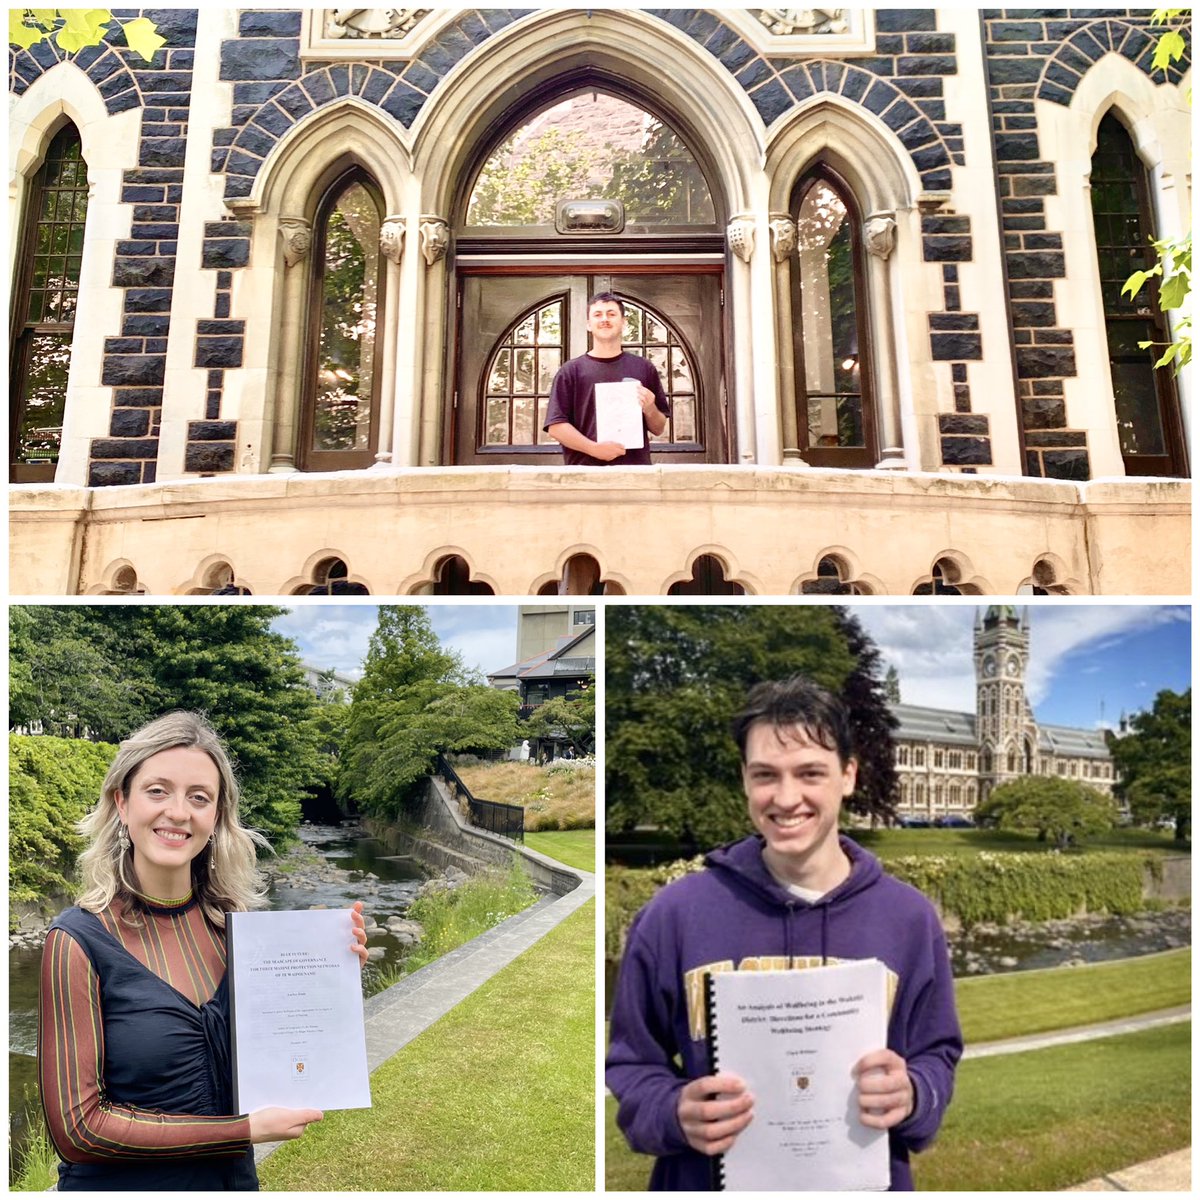 Ka rawe! Congratulations to #MPlan candidates Tim Boyle, Larissa Hinds & Clark Williams on submitting their #theses. Well done team. The planning world is lucky to have you joining the profession 👏🏽👏🏽 #postgradlife #urbanplanning #planning #onlyotago #environmental #plan